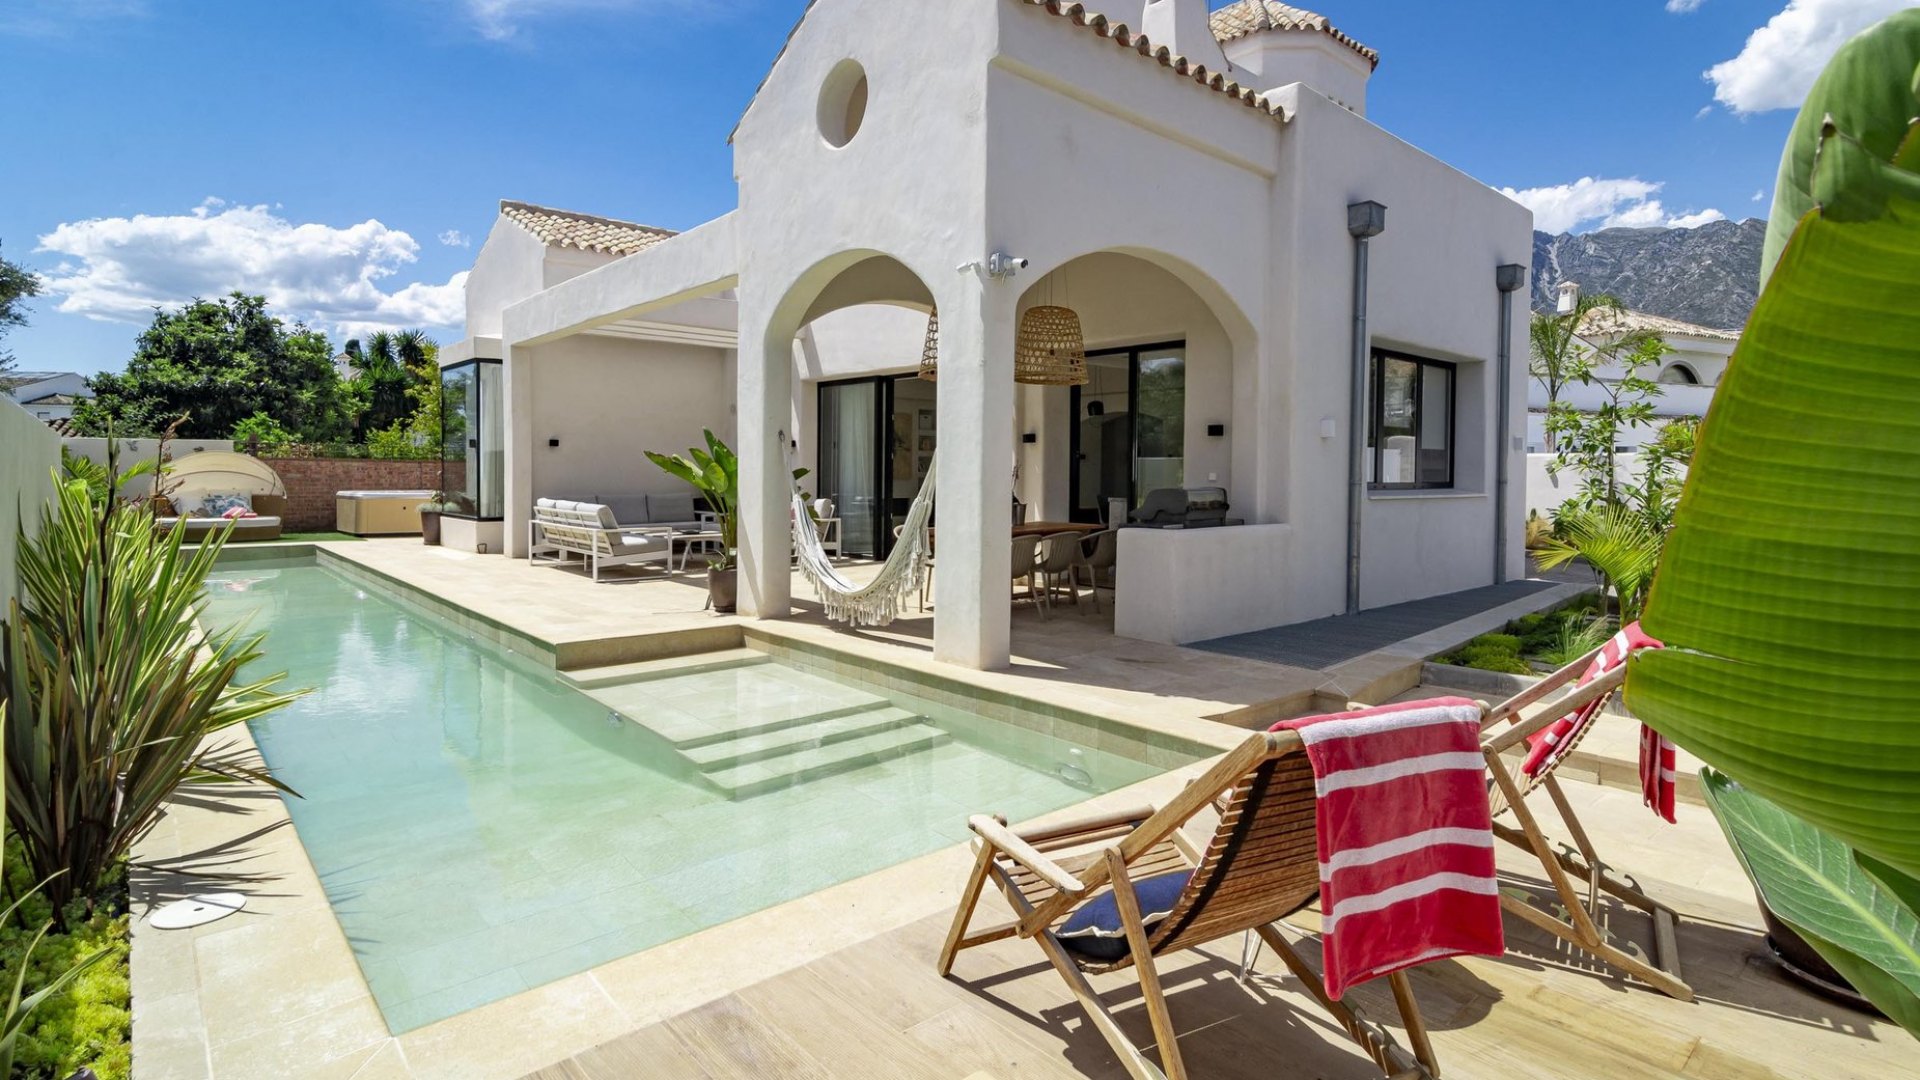 New built villa with California/Andalusian style in Puerto Banús